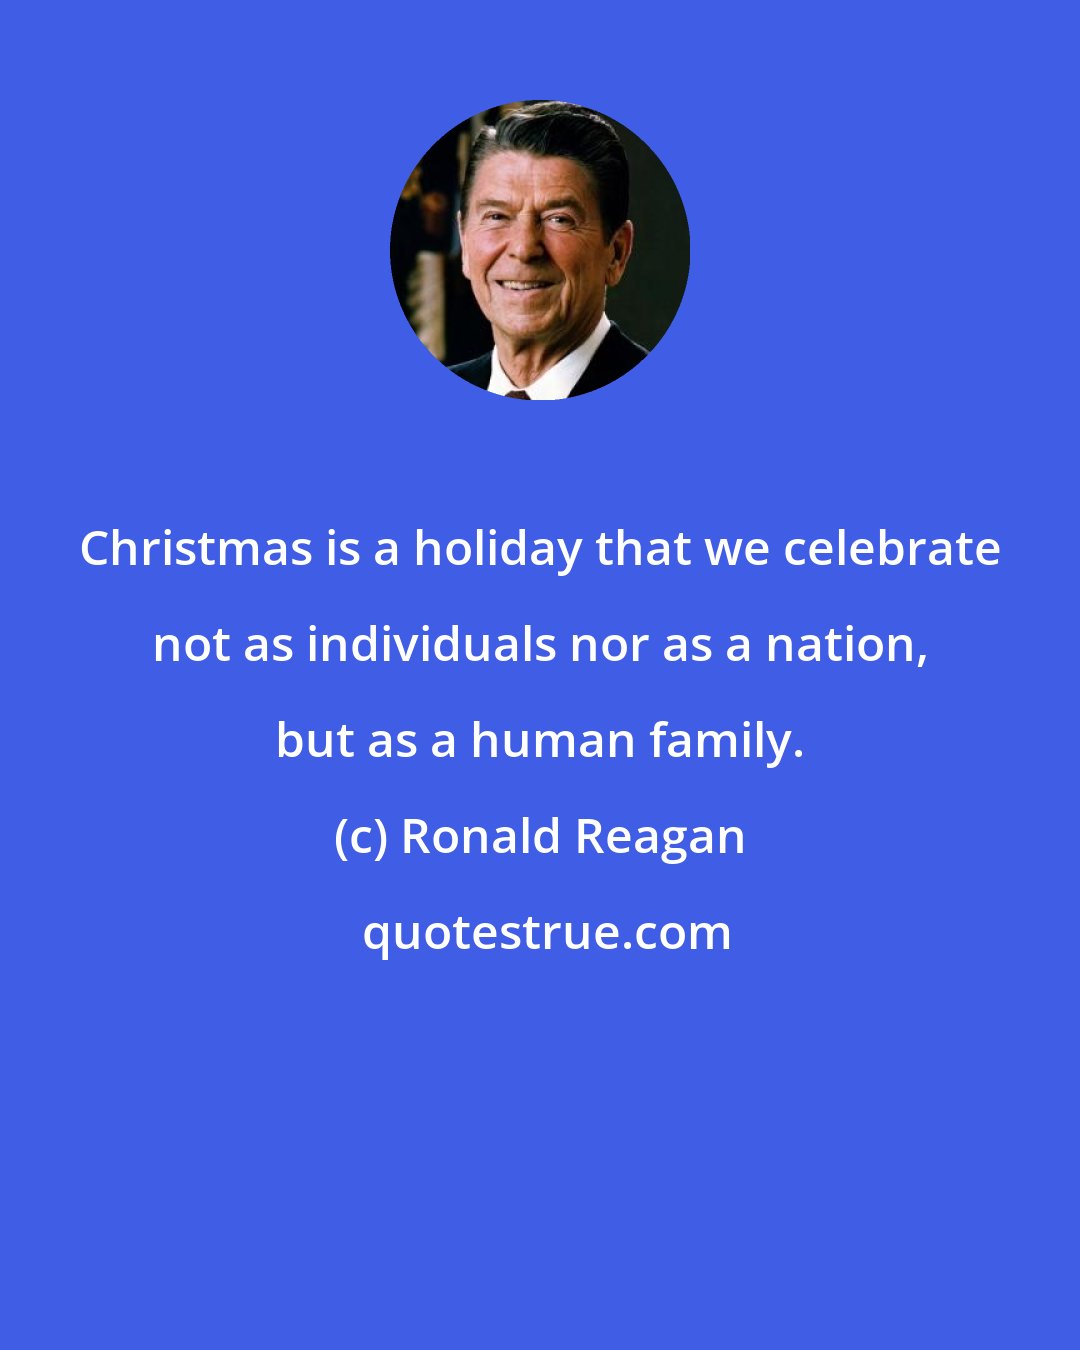 Ronald Reagan: Christmas is a holiday that we celebrate not as individuals nor as a nation, but as a human family.